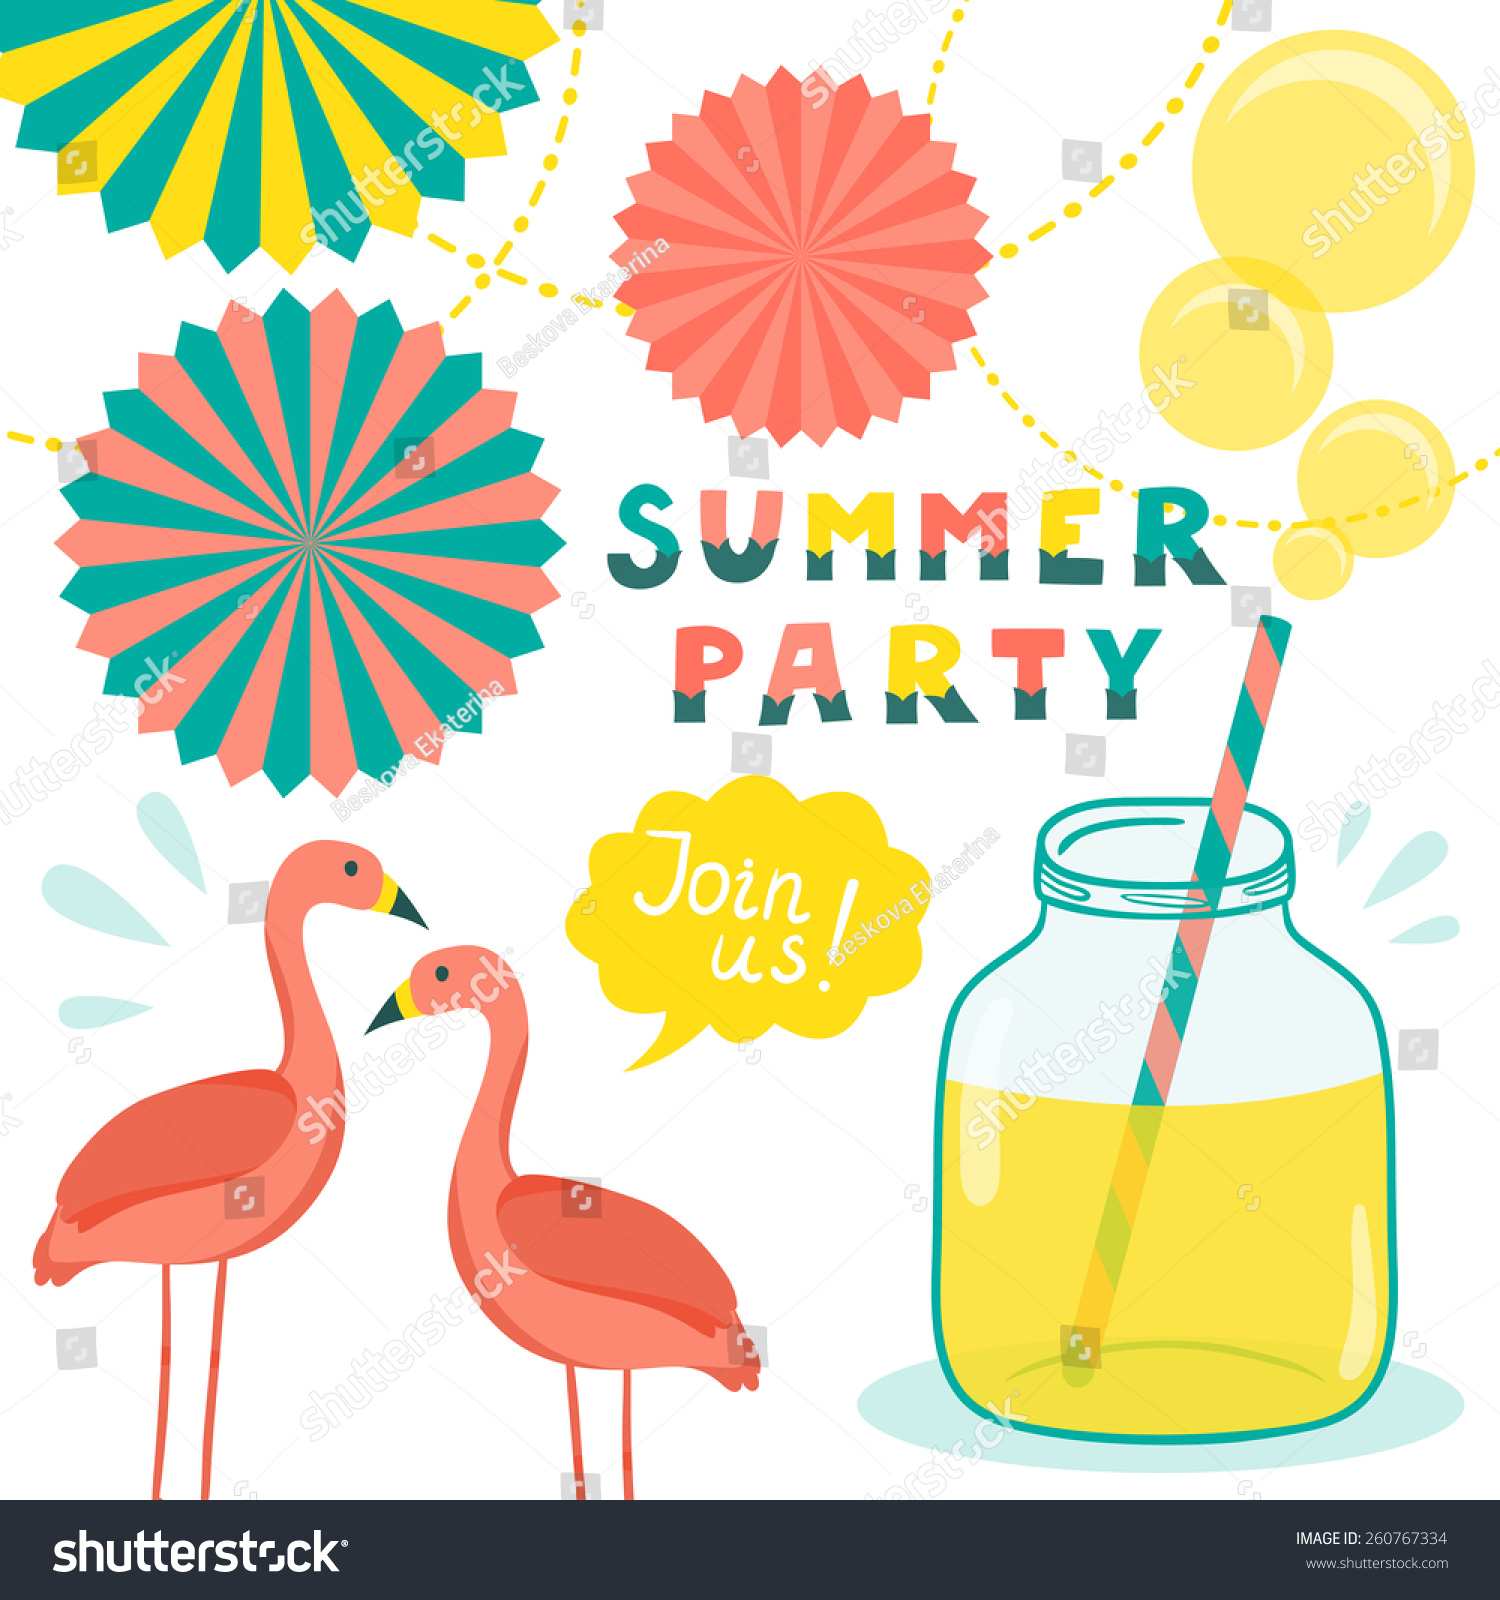 clipart summer party - photo #41